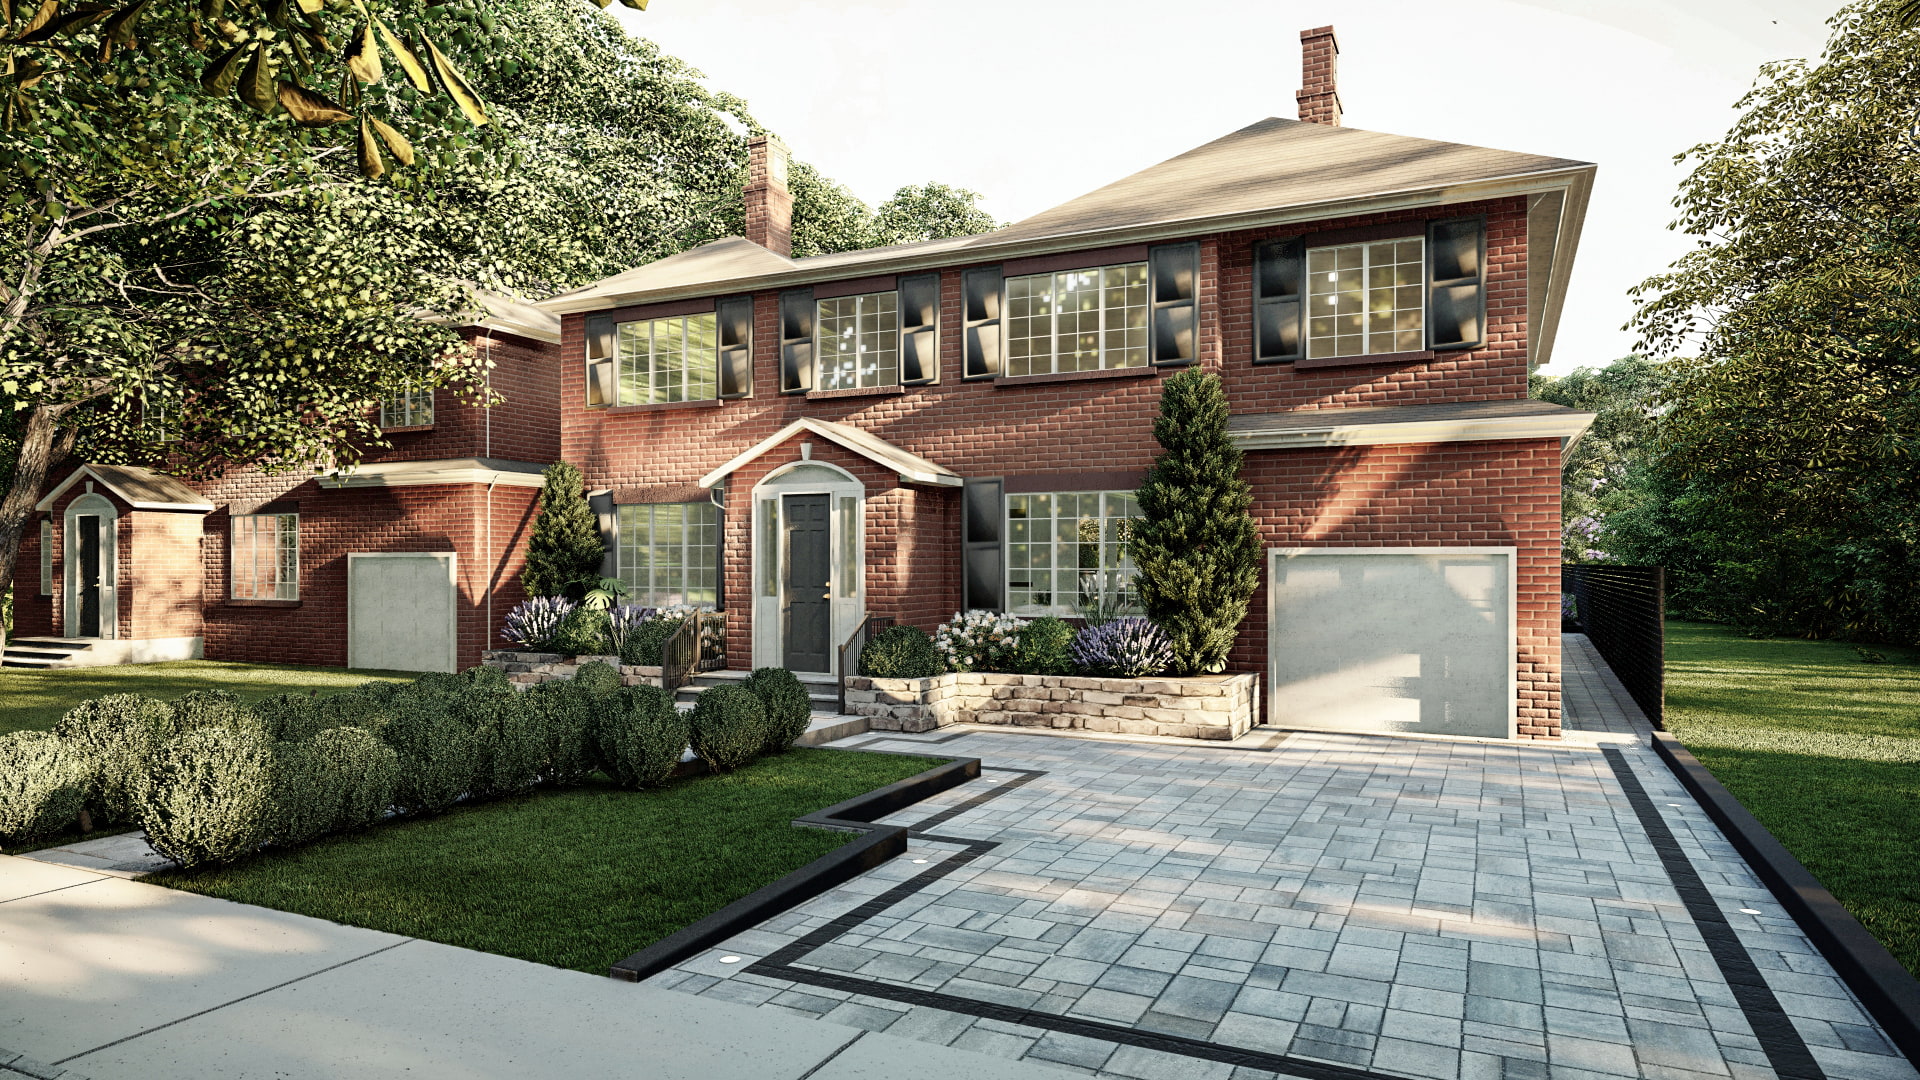 Homelydesign-scarborough-home-driveway-landscaping